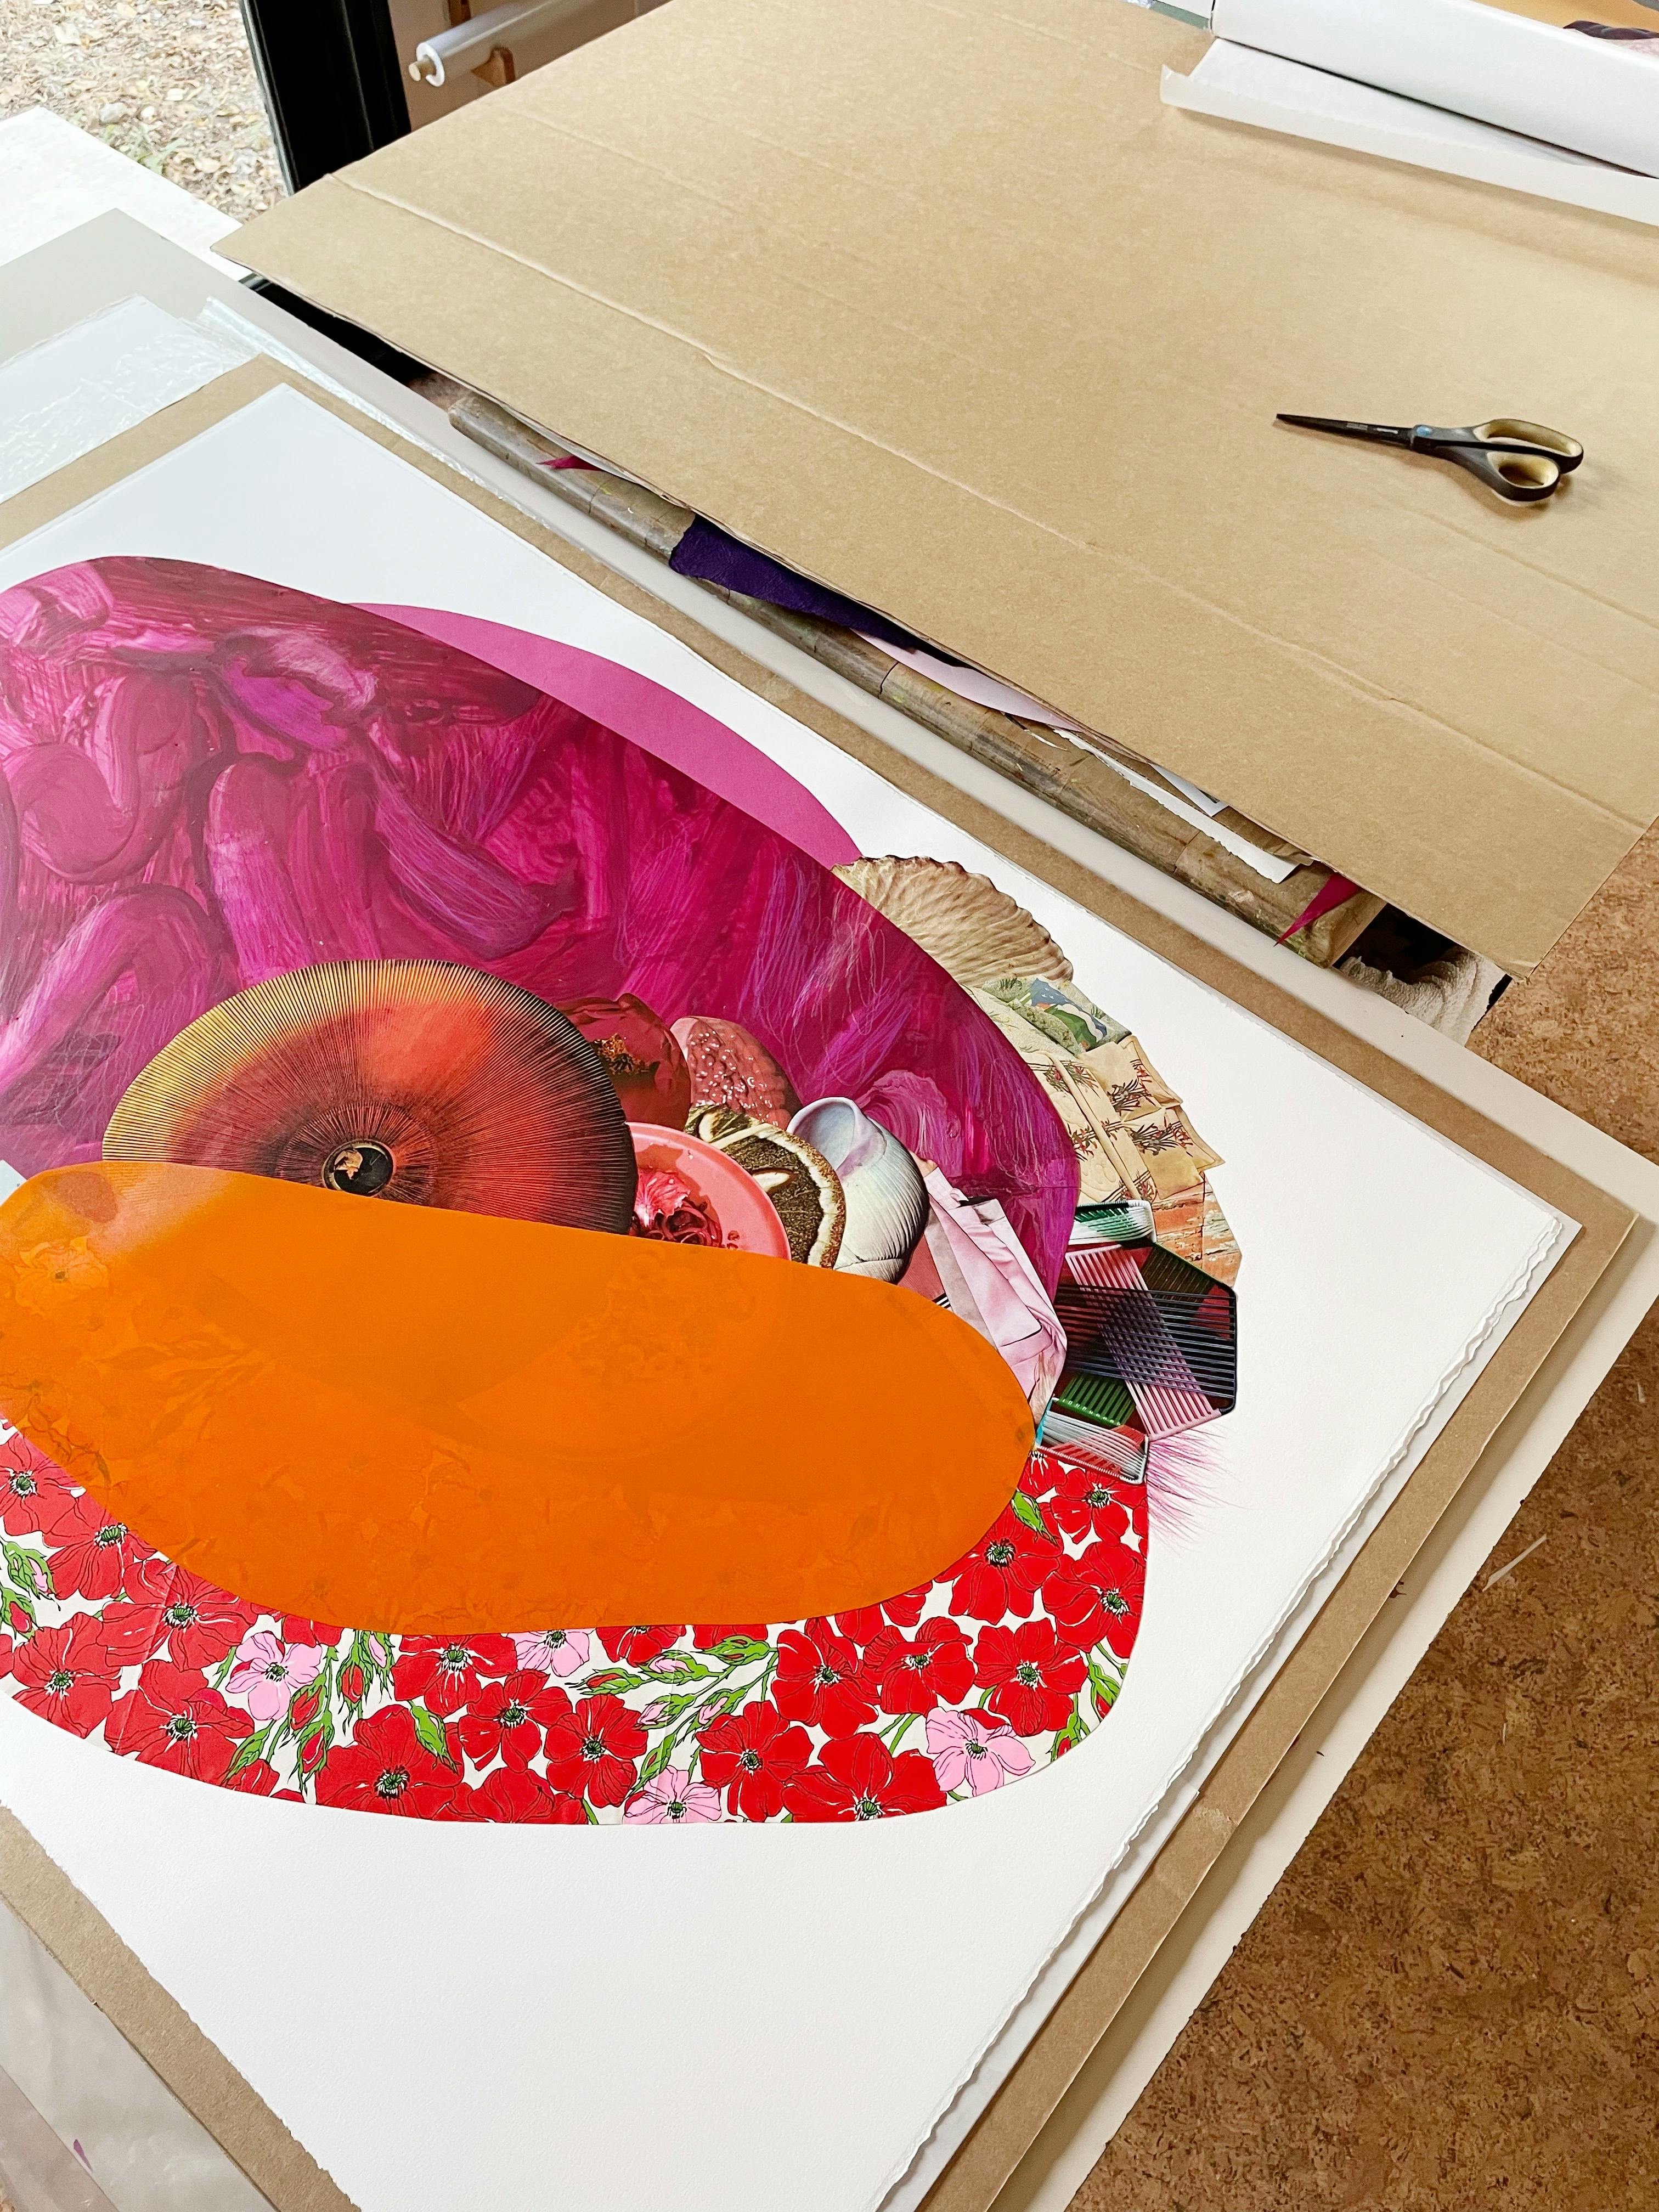 Pink and orange mixed-media collage with flowers by artist Xochi Solis on a piece of cardboard in her studio.